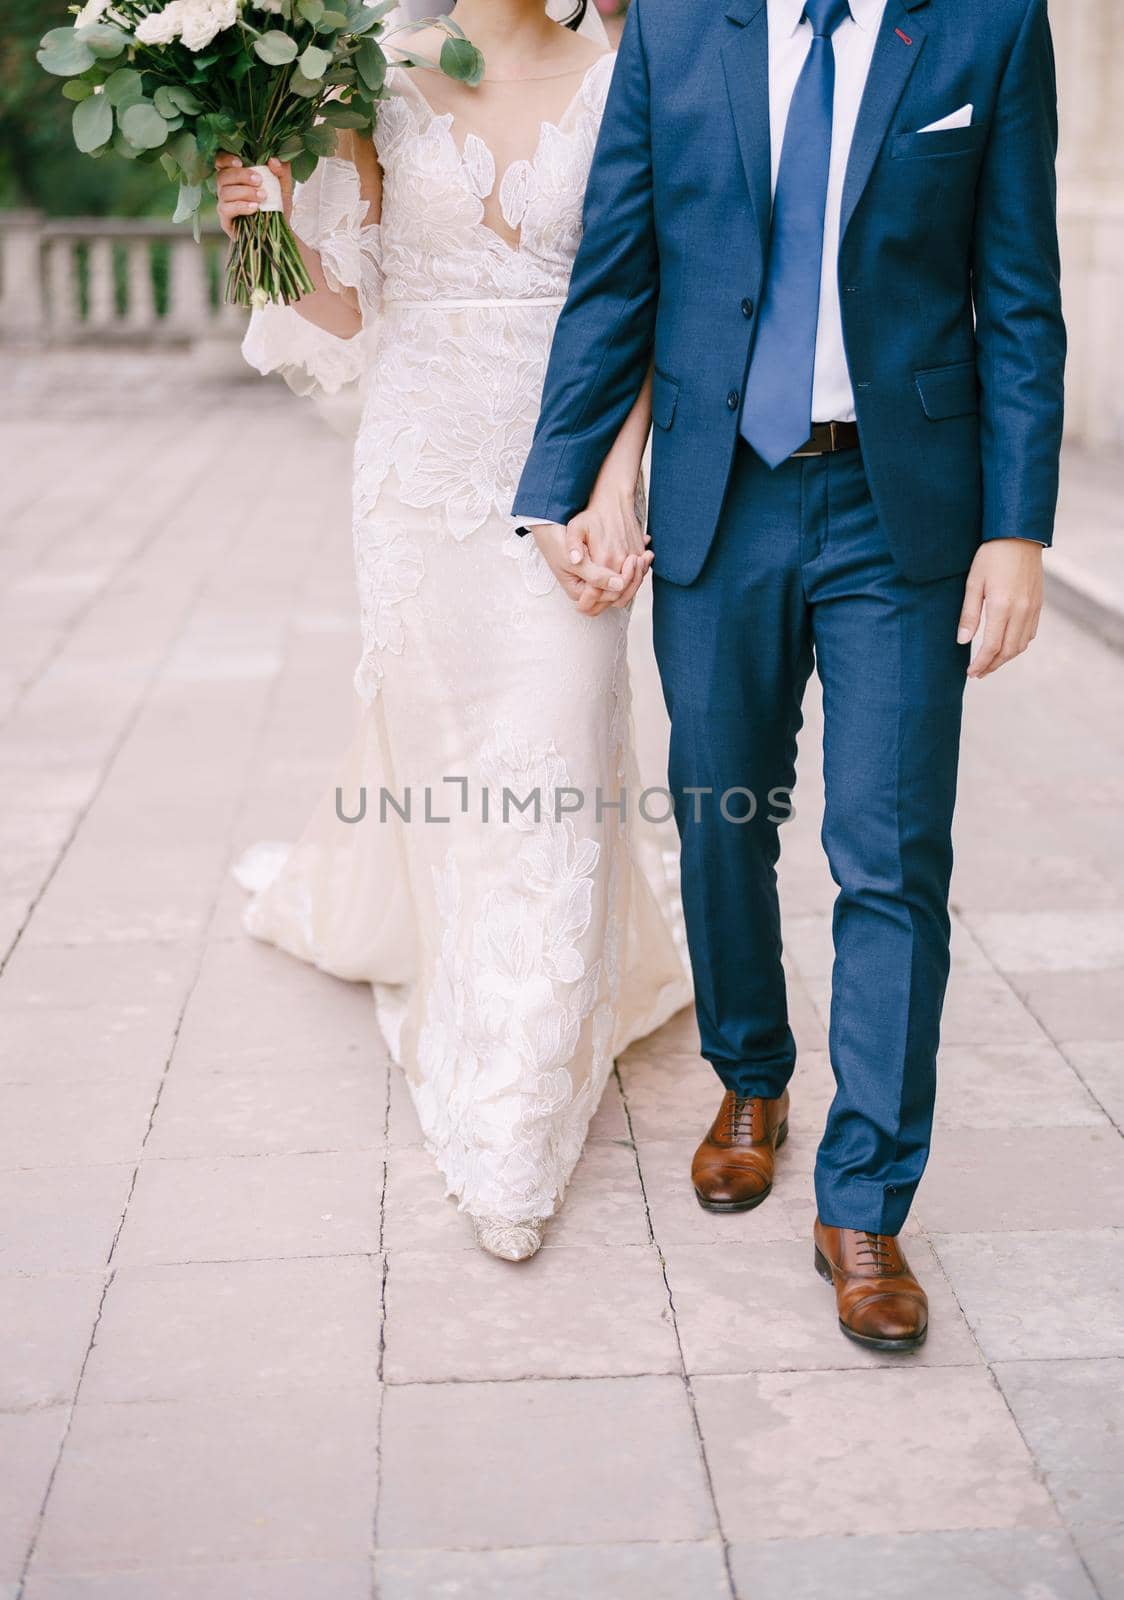 Bride and groom walk along the cobblestones holding hands. Close-up. High quality photo